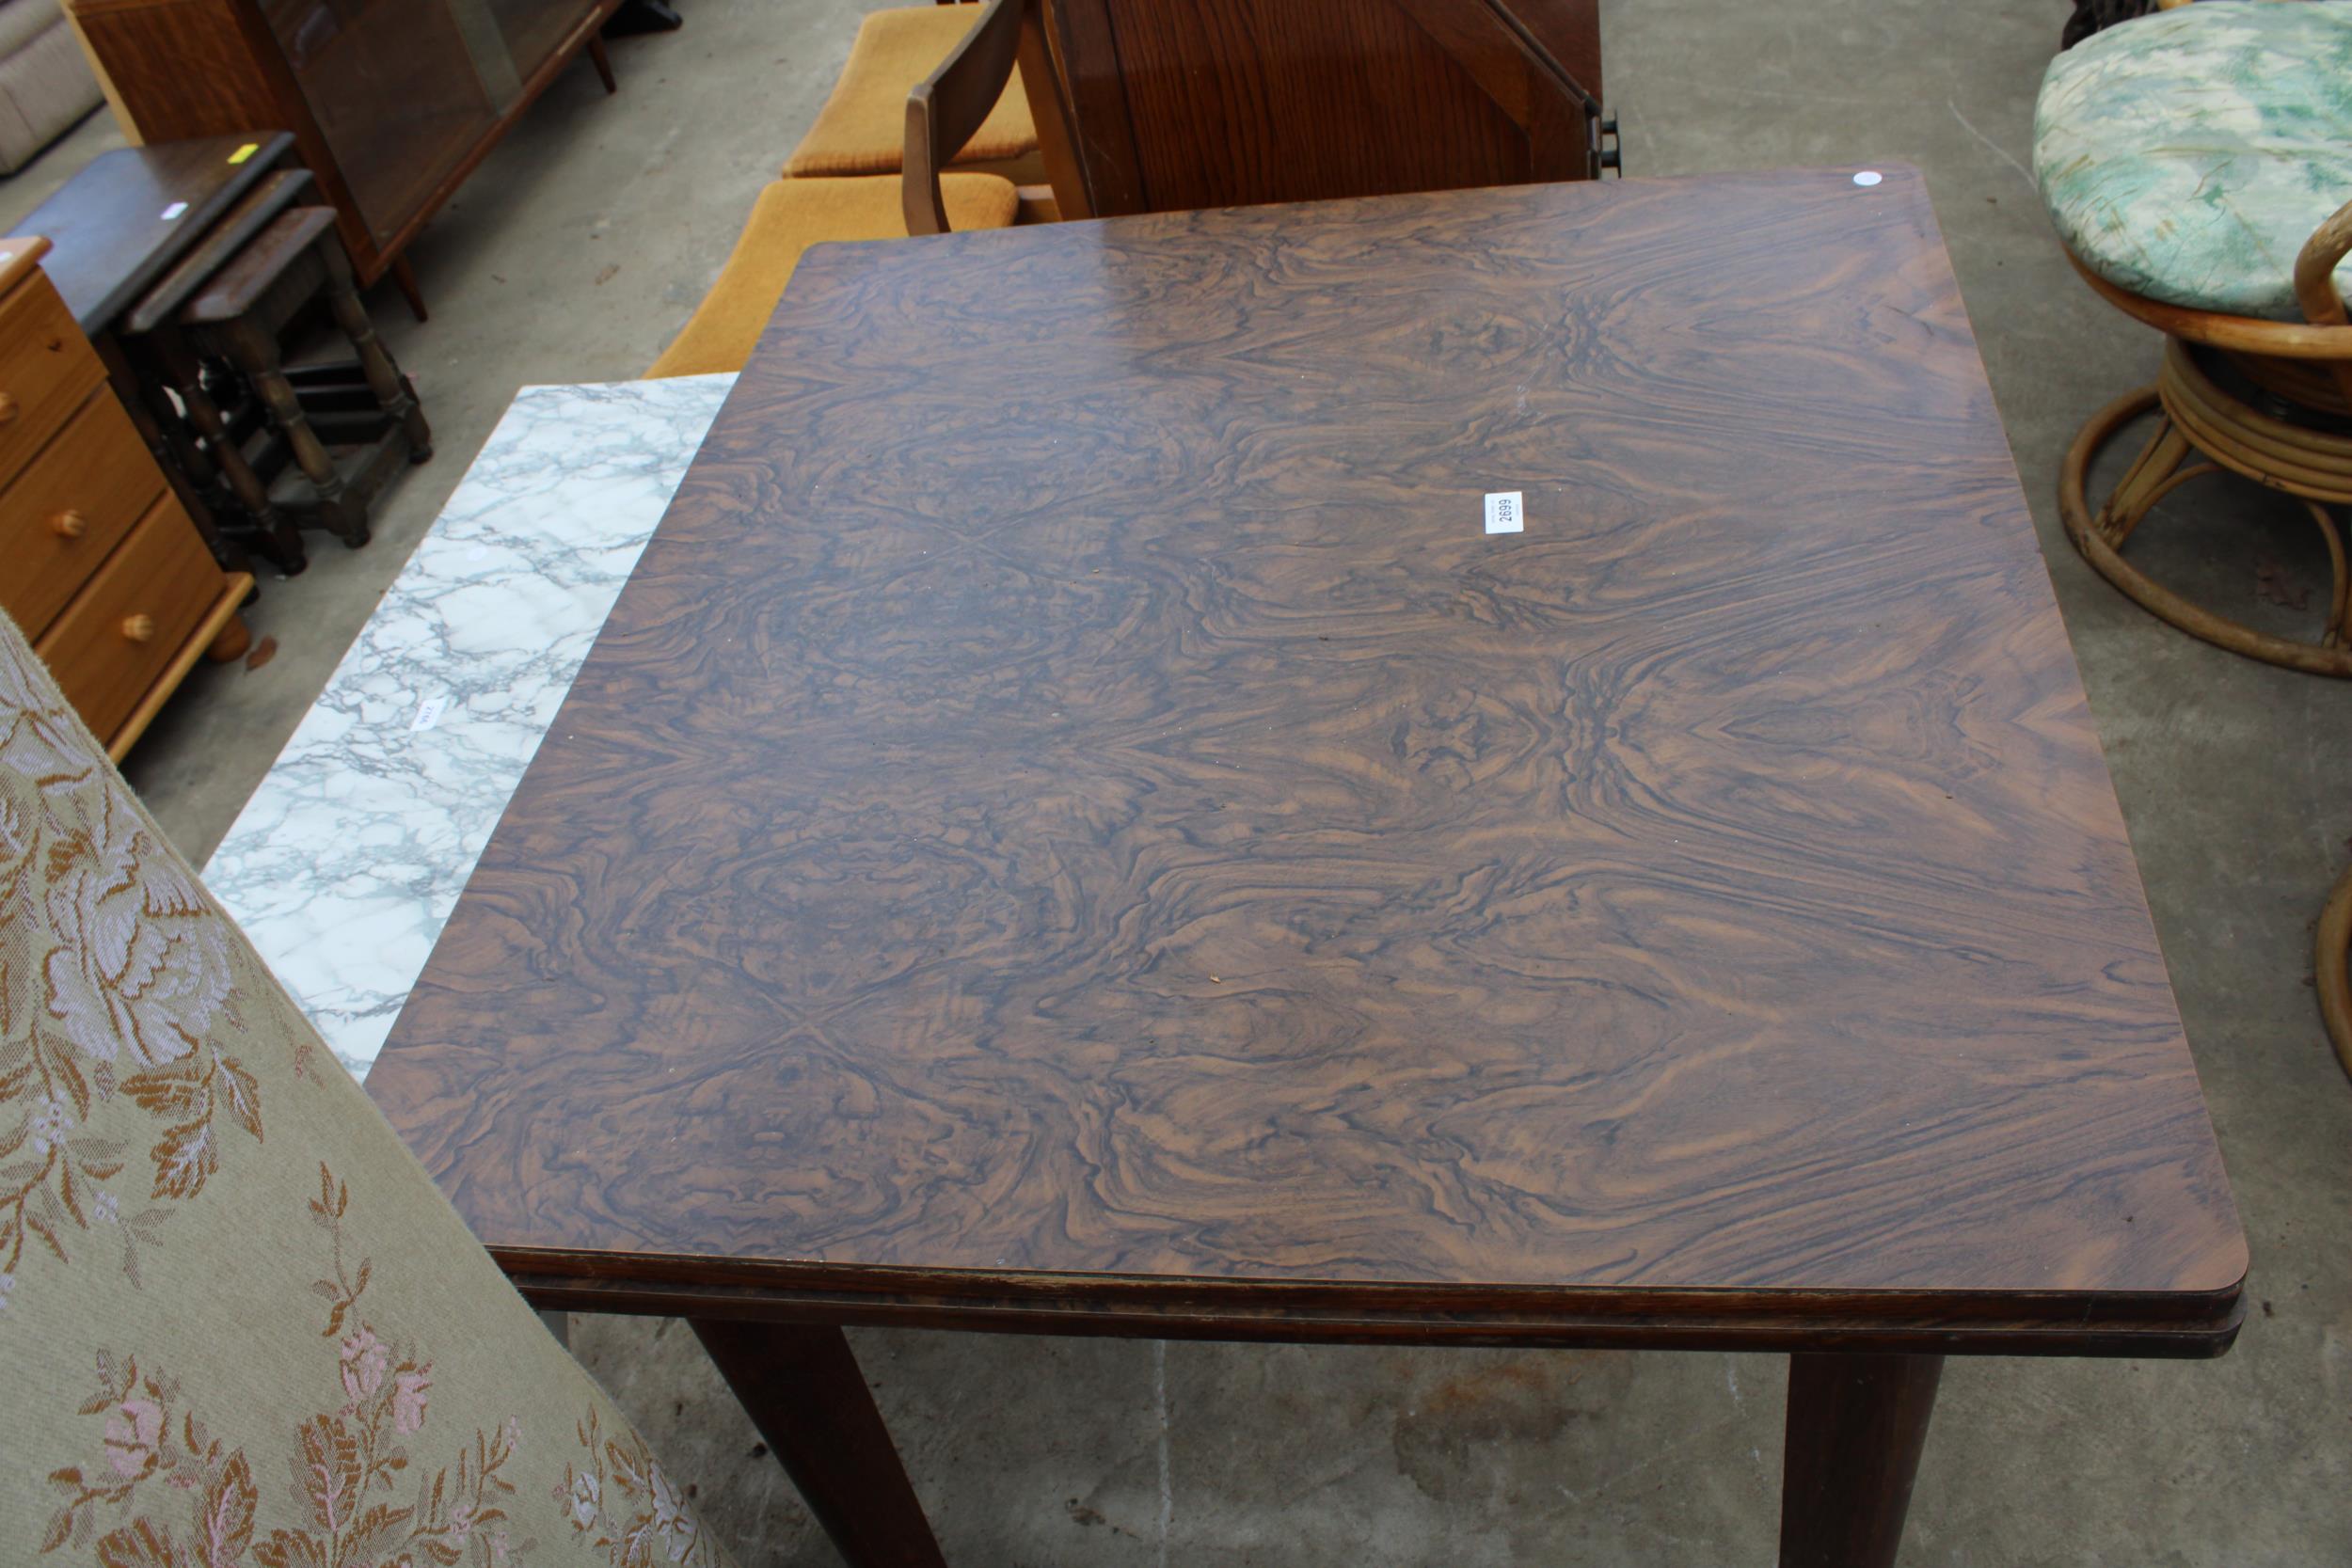 A MID 20TH CENTURY OAK DRAW-LEAF TABLE WITH FORMICA WALNUT TOP - Image 2 of 2